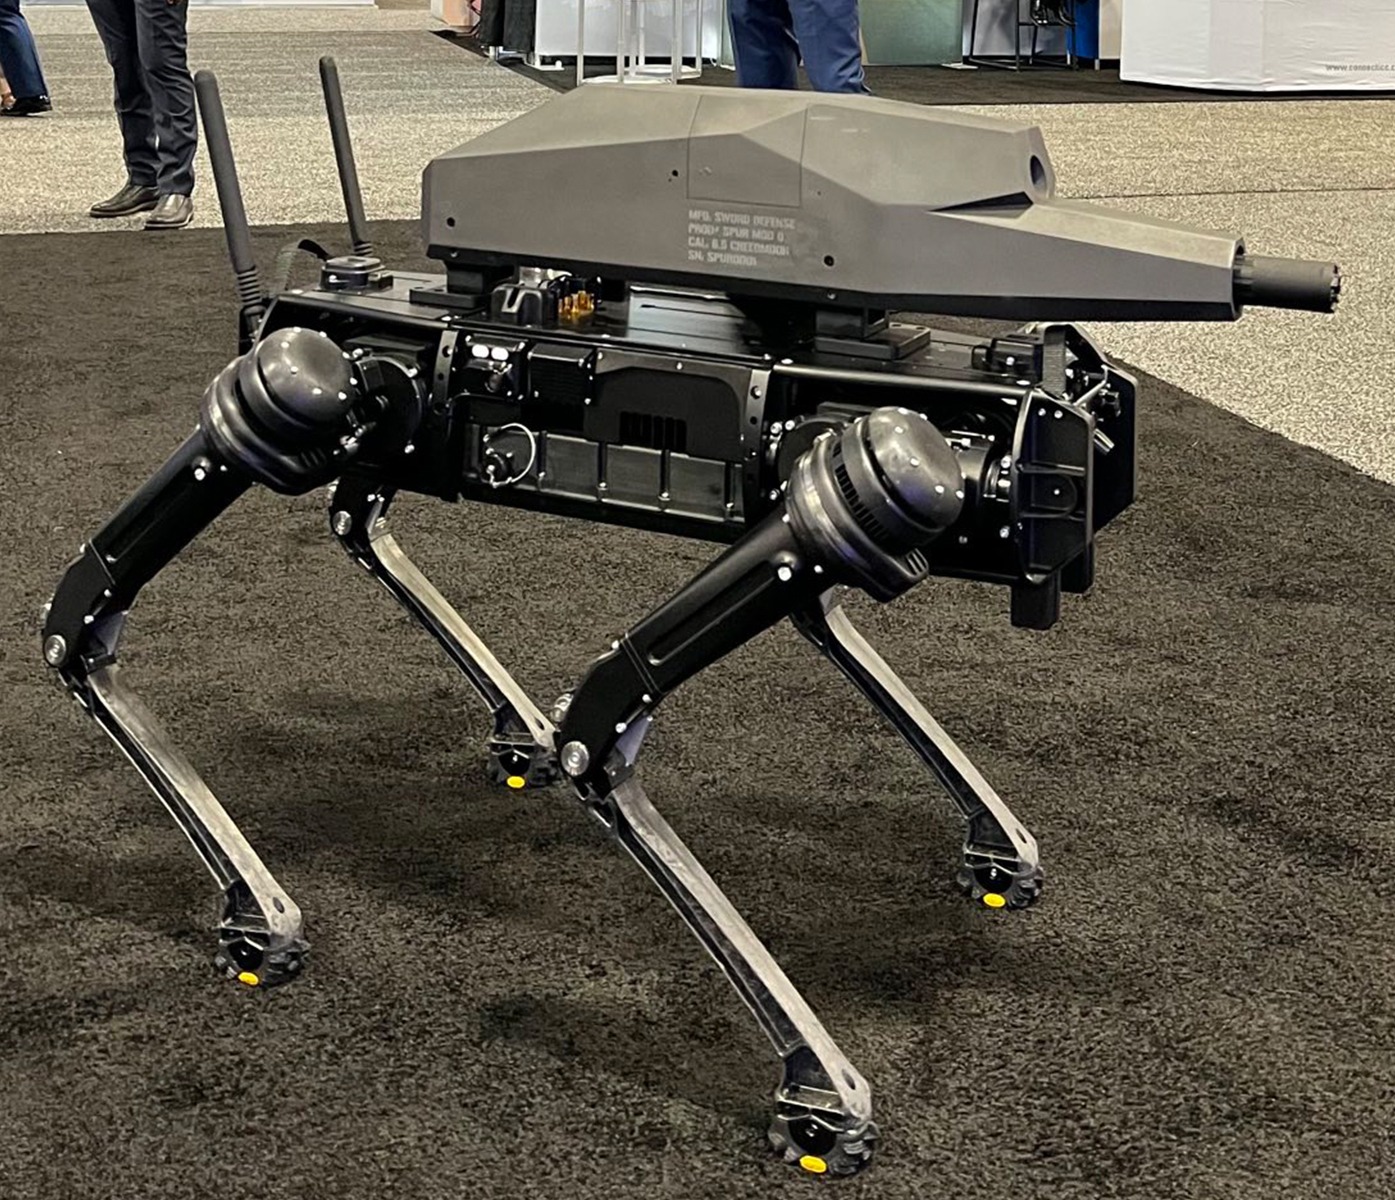 More about attaching sniper rifles to robots |